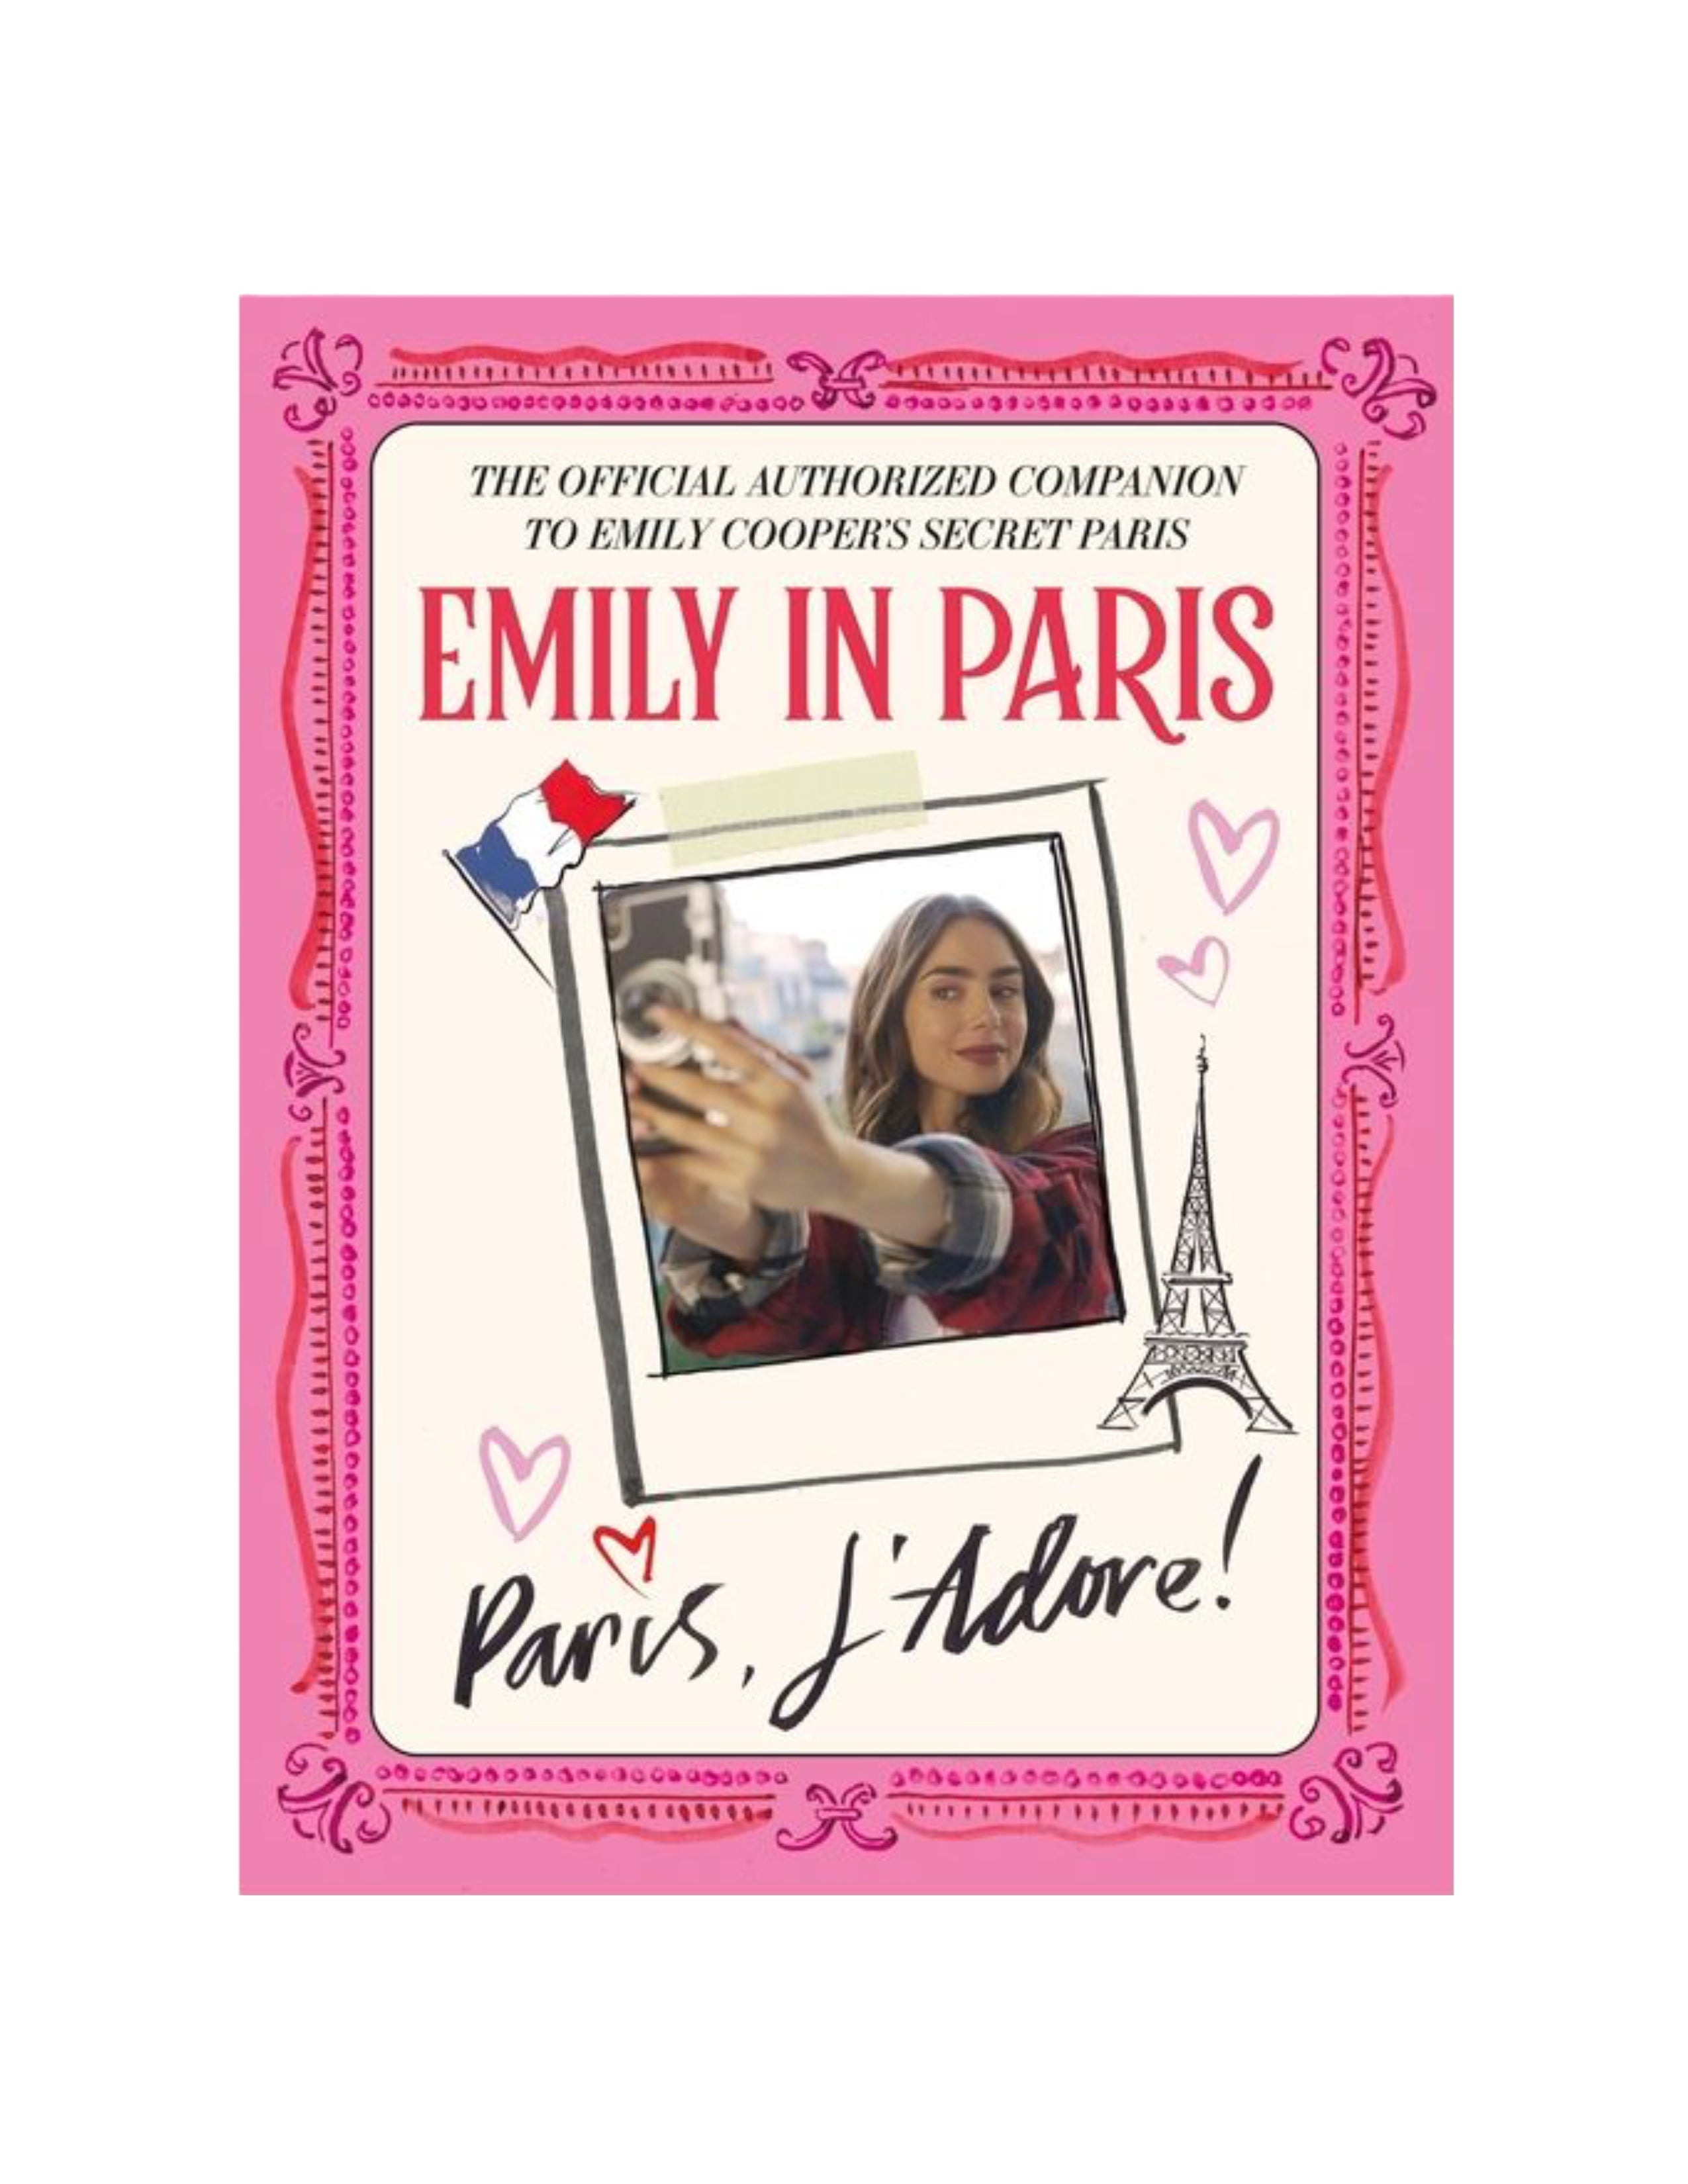 Emily In Paris: The Official Authorized Companion to Emily's Secret